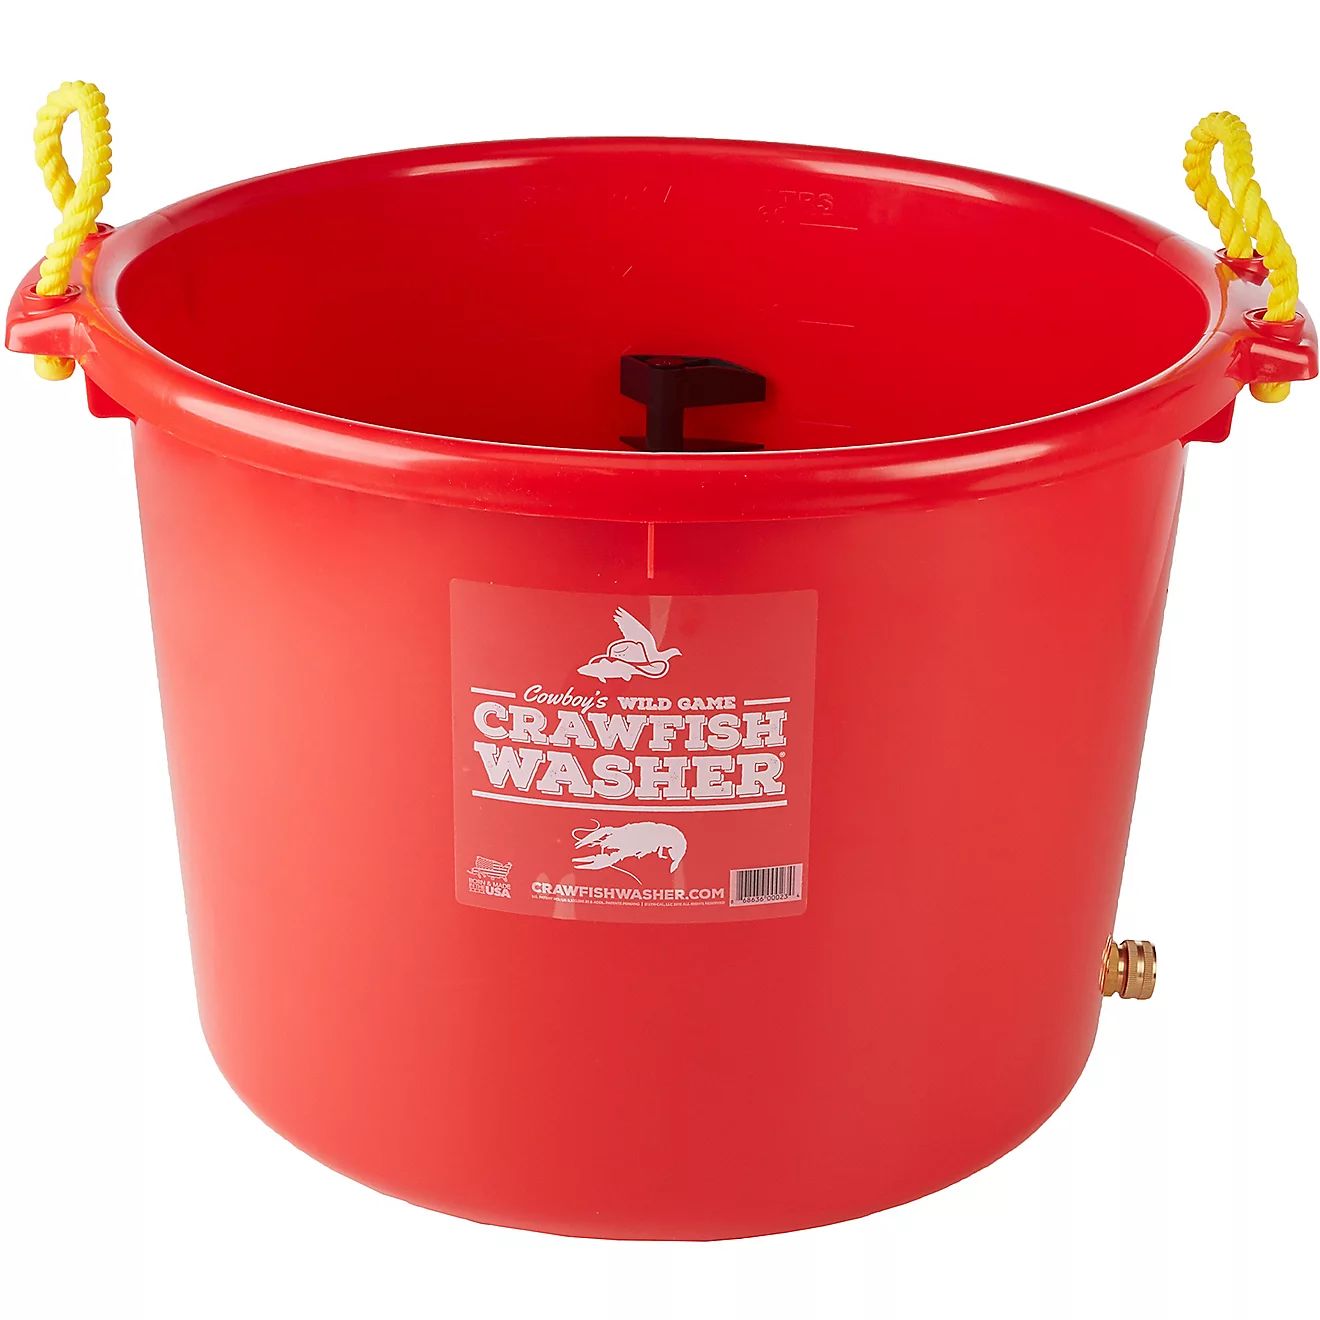 Cowboy's Wild Crawfish Washer | Free Shipping at Academy | Academy Sports + Outdoors